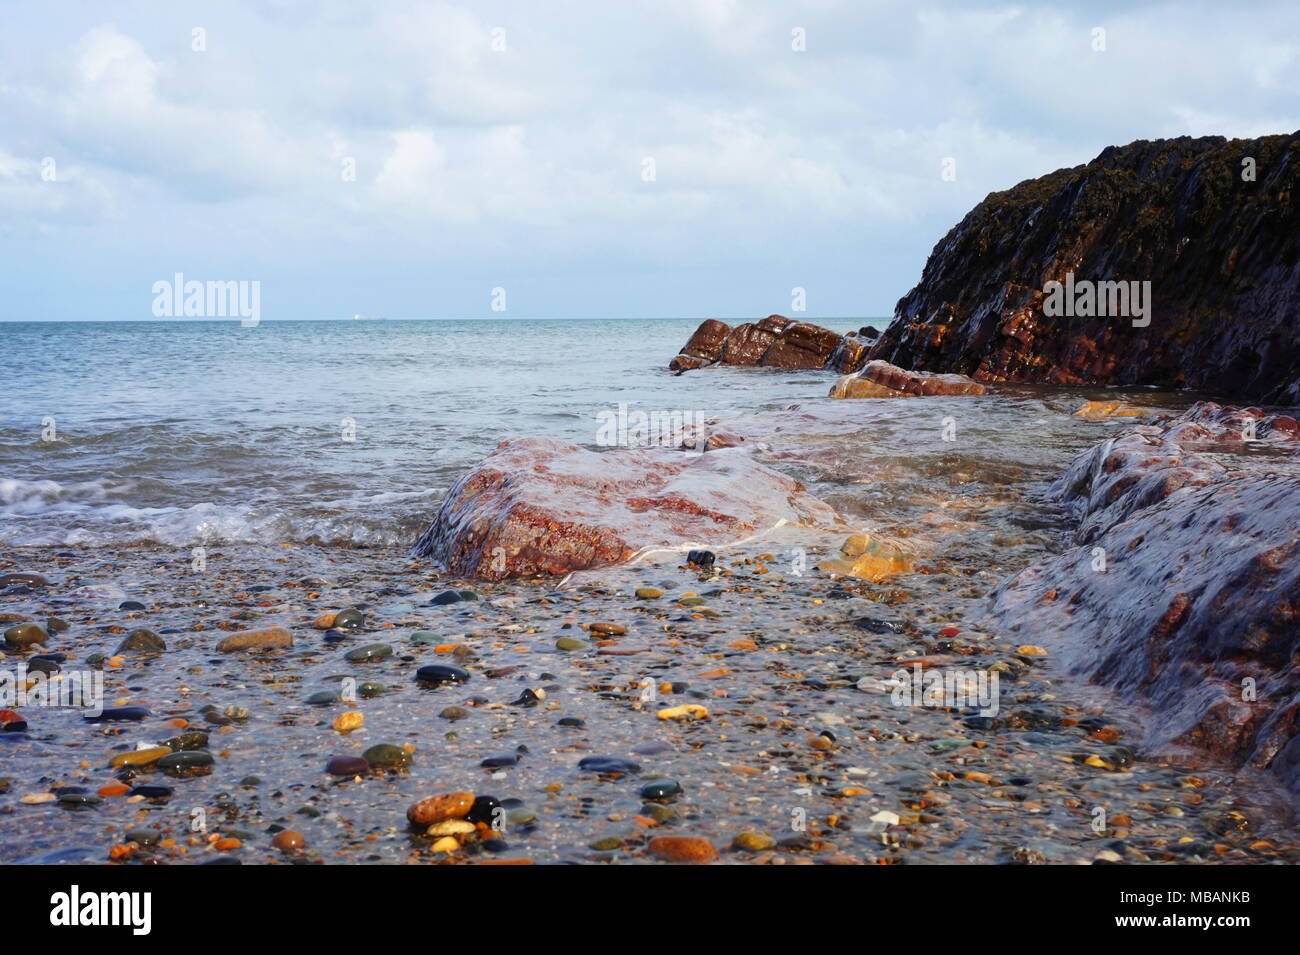 Picture taken at a UK beach in Springtime. Water makes the textures look shiny and smooth resulting in a beautiful piece with amazing color. Stock Photo